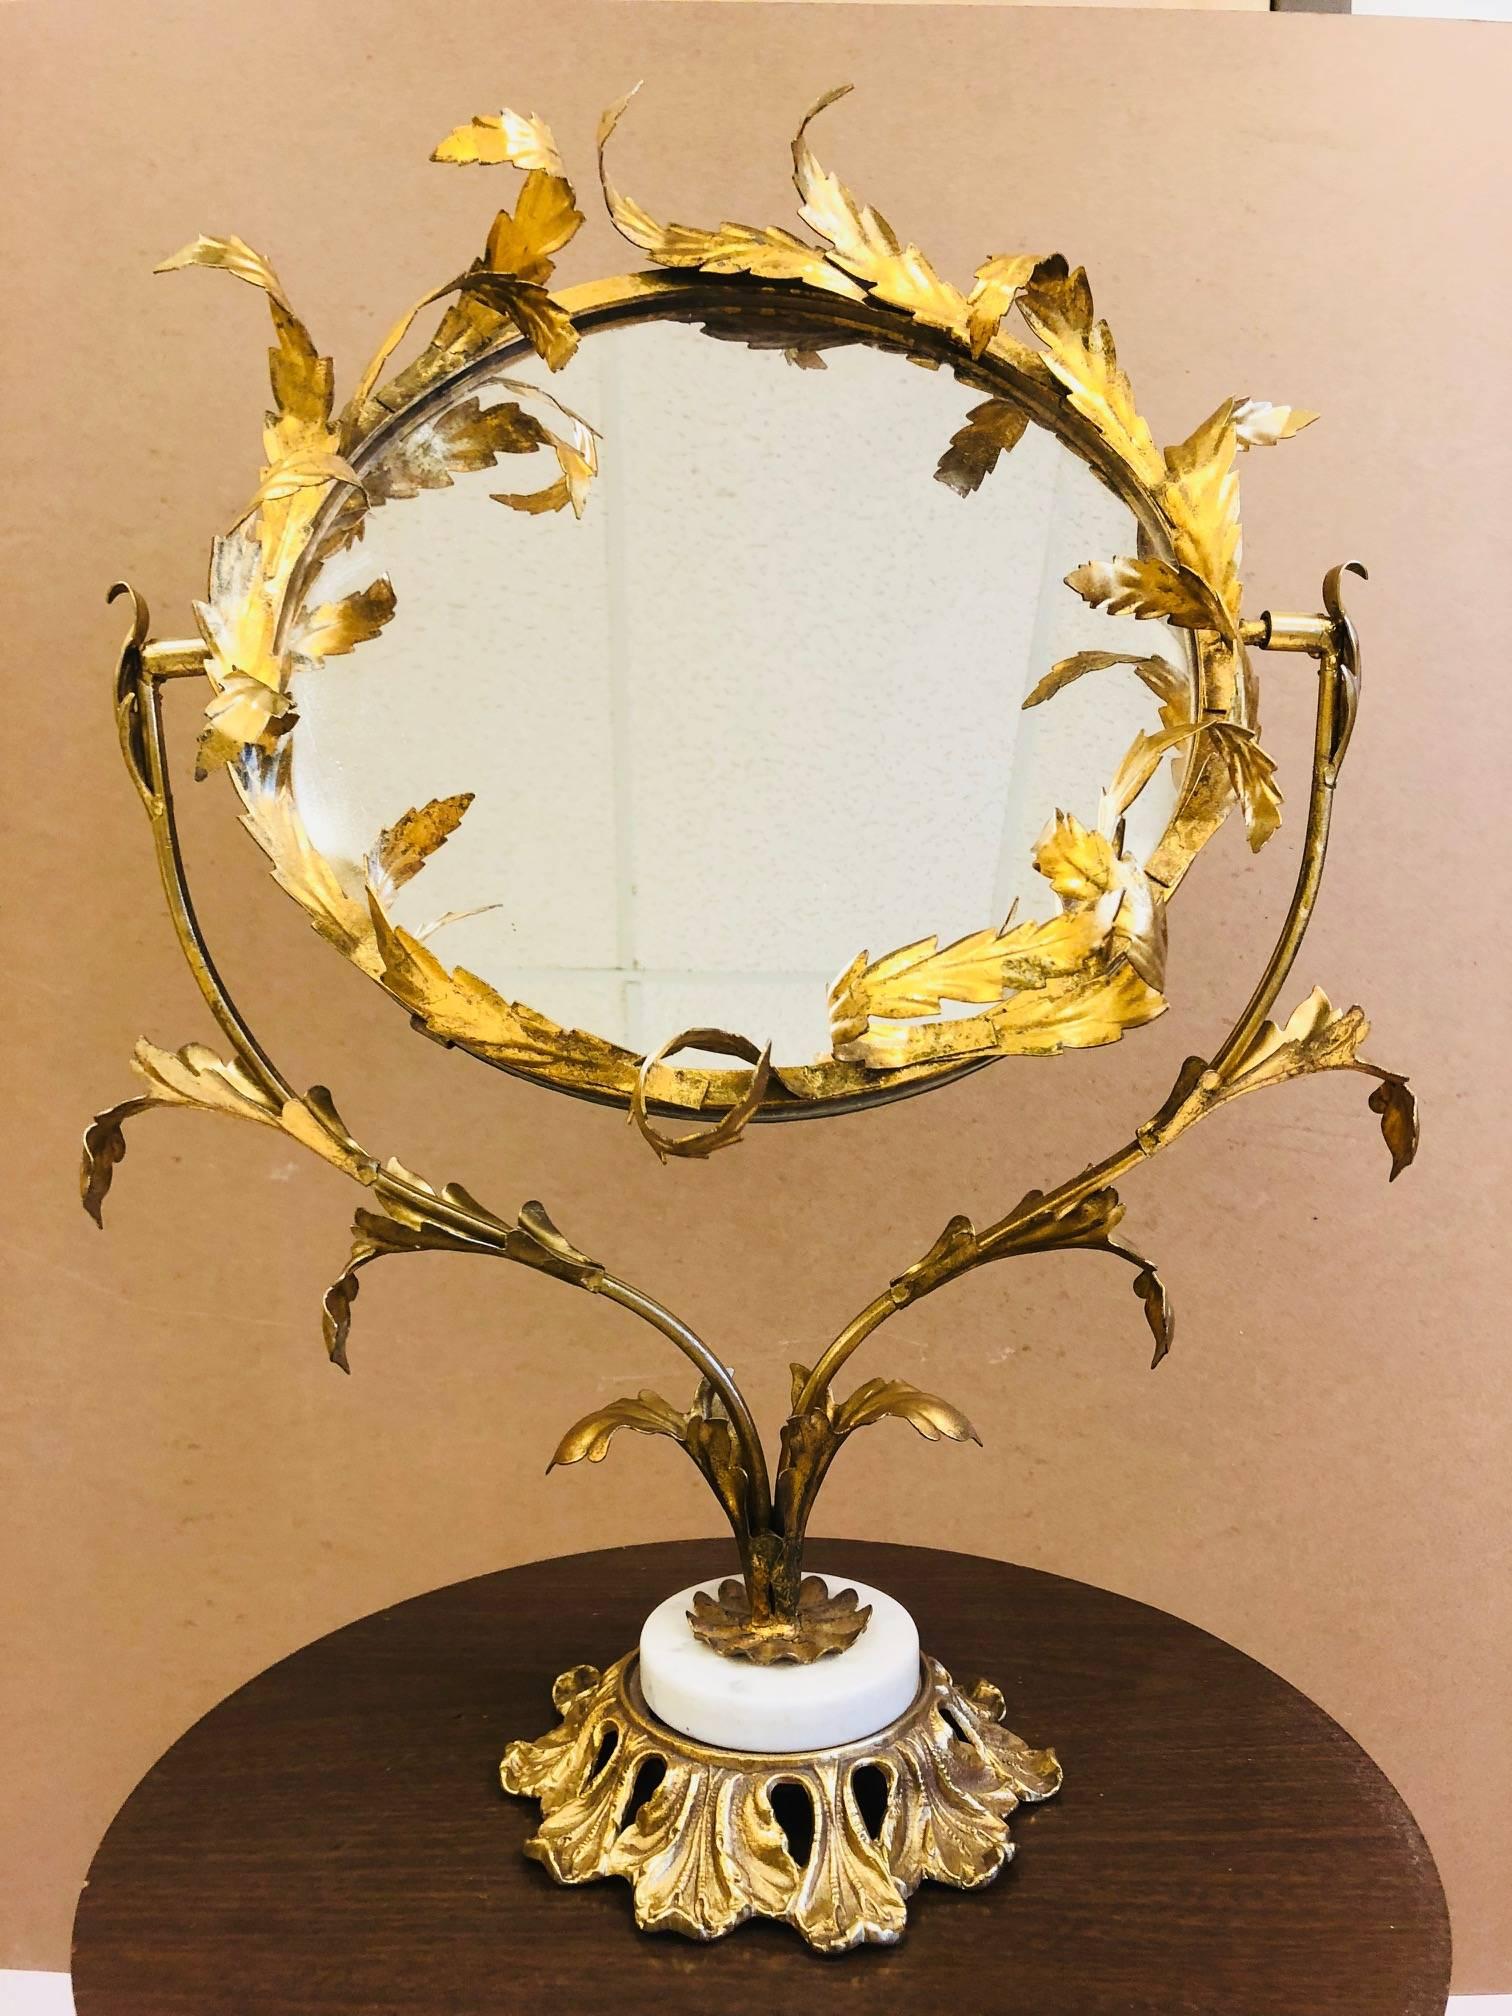 Gold gilt table or vanity mirror. Frame gold gilt metal with a floral pattern. Base is marble.
Measures: 24.5